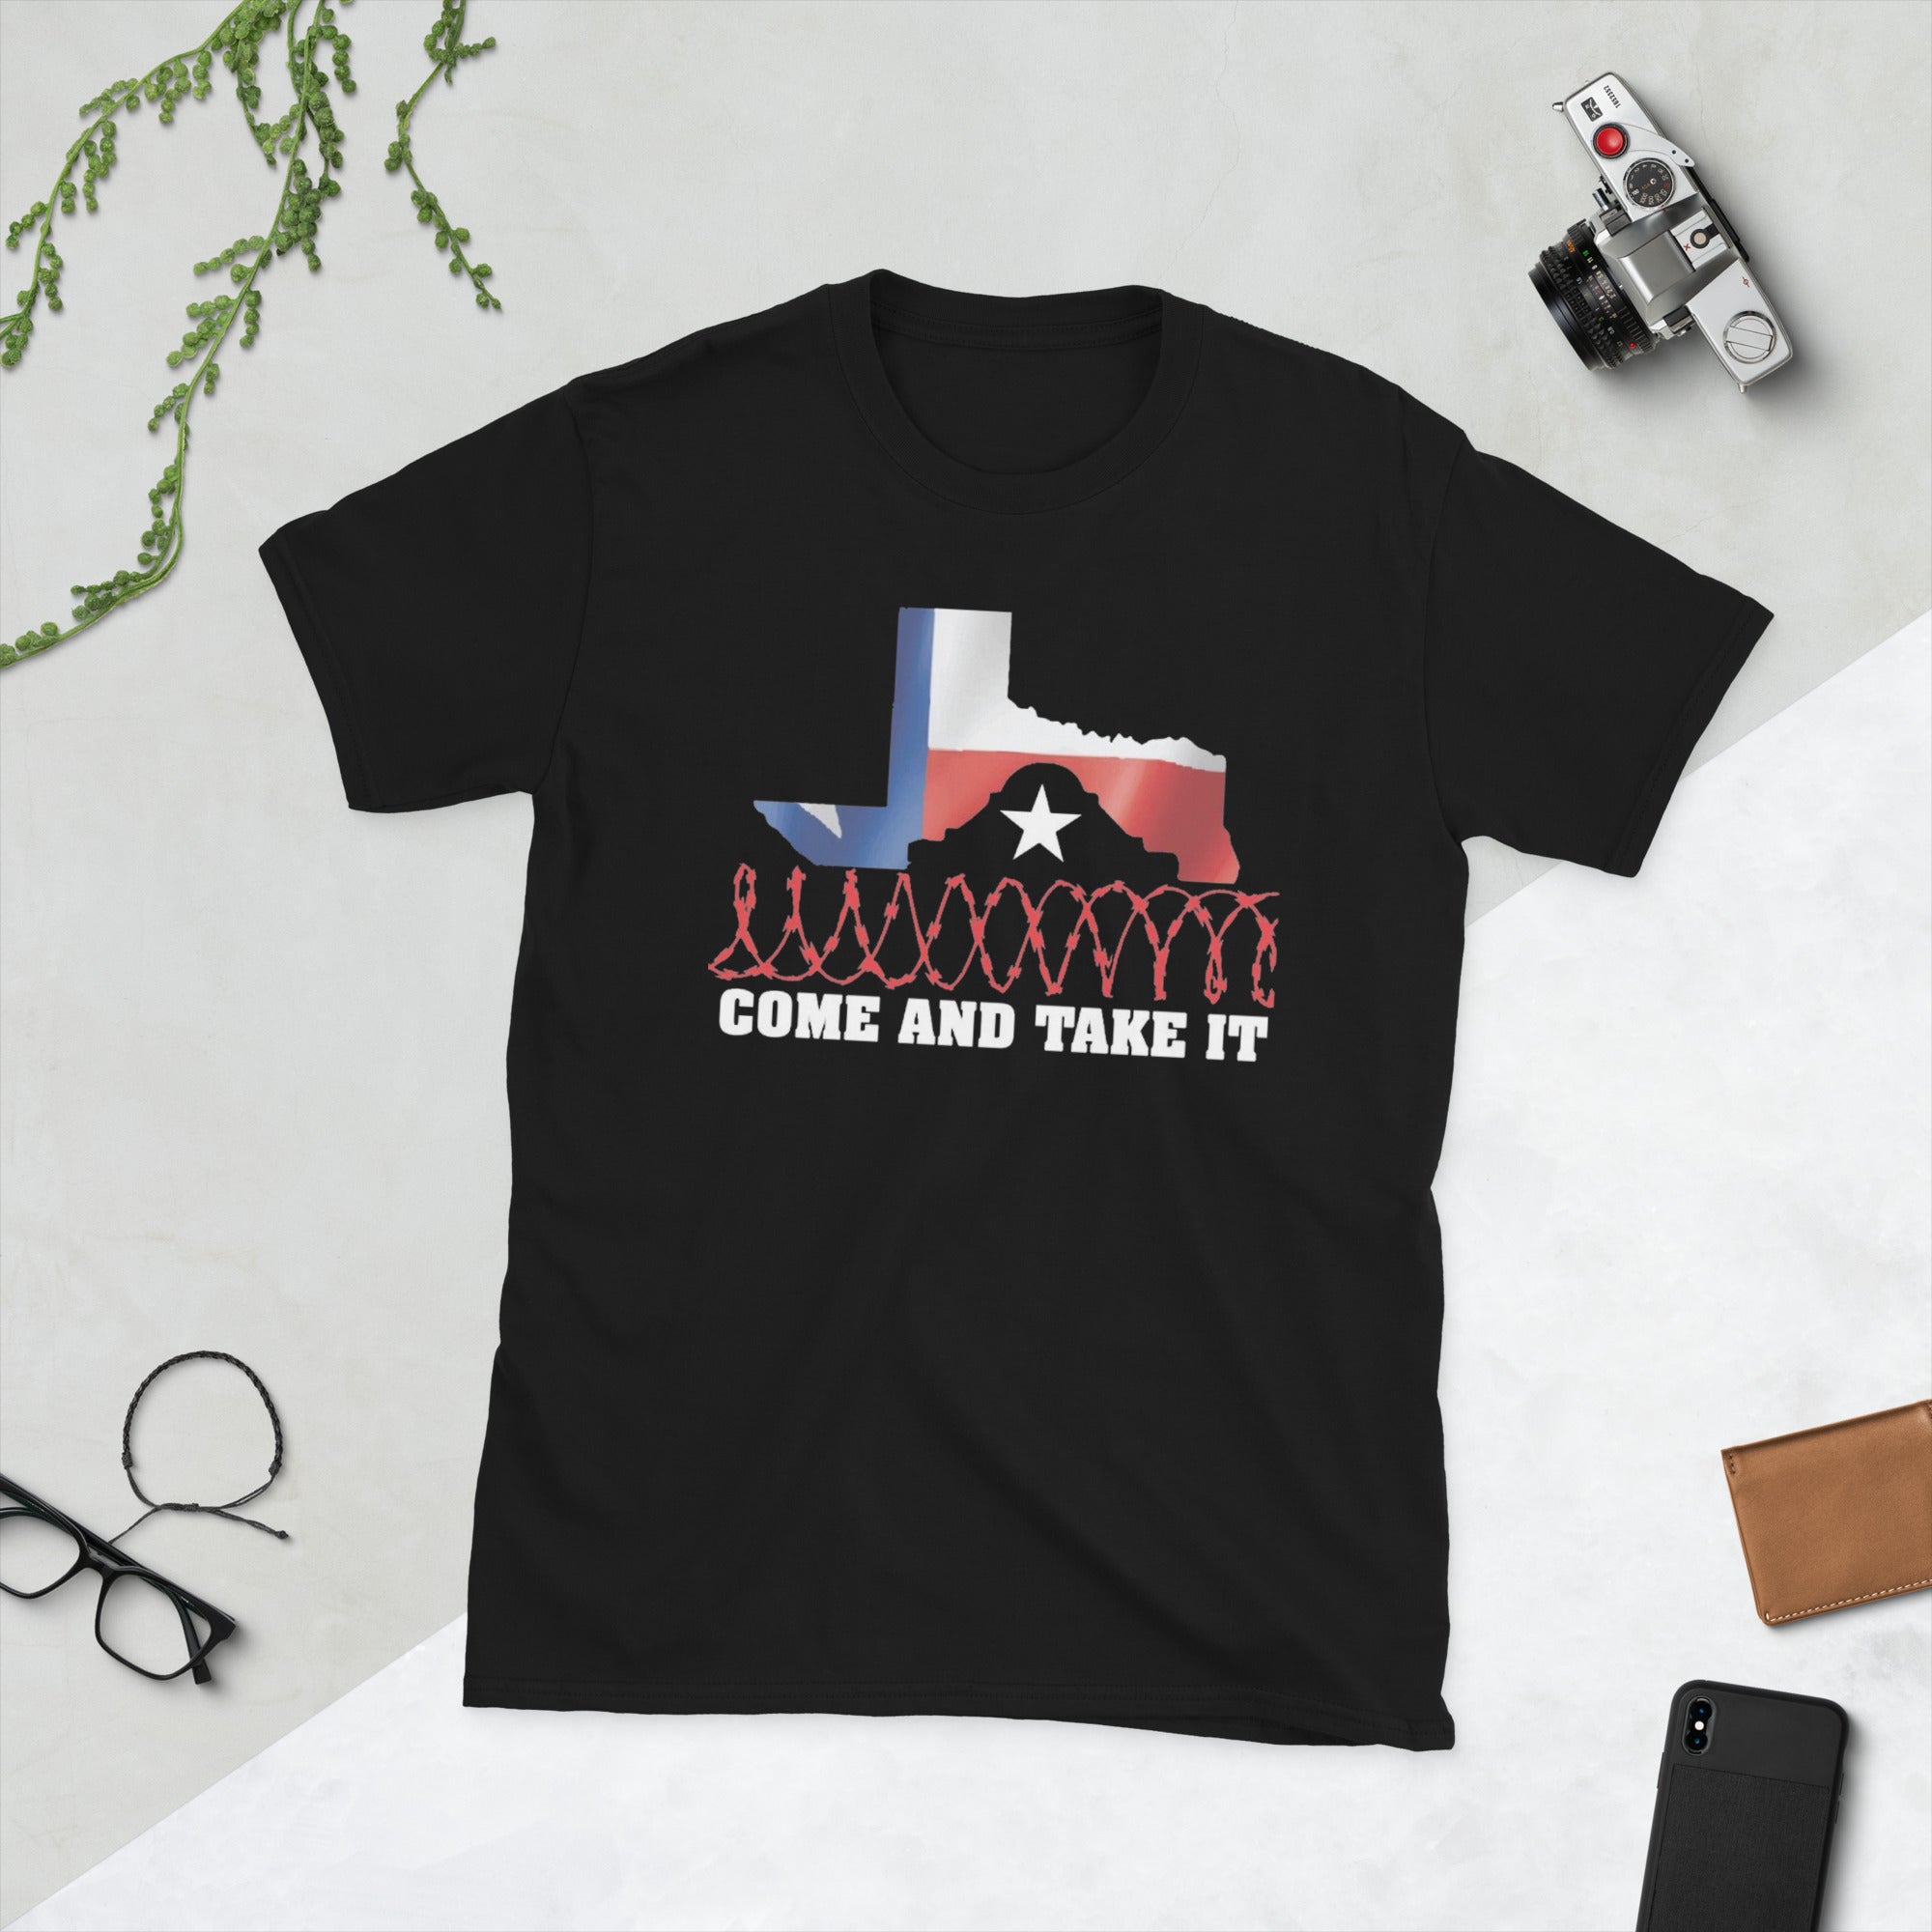 Come And Take It Razor Wire Texas Flag Shirt, Texas Attorney General Support Tshirt, American Patriot Tee, Lone Star State Flag, Proud Texan - Madeinsea©